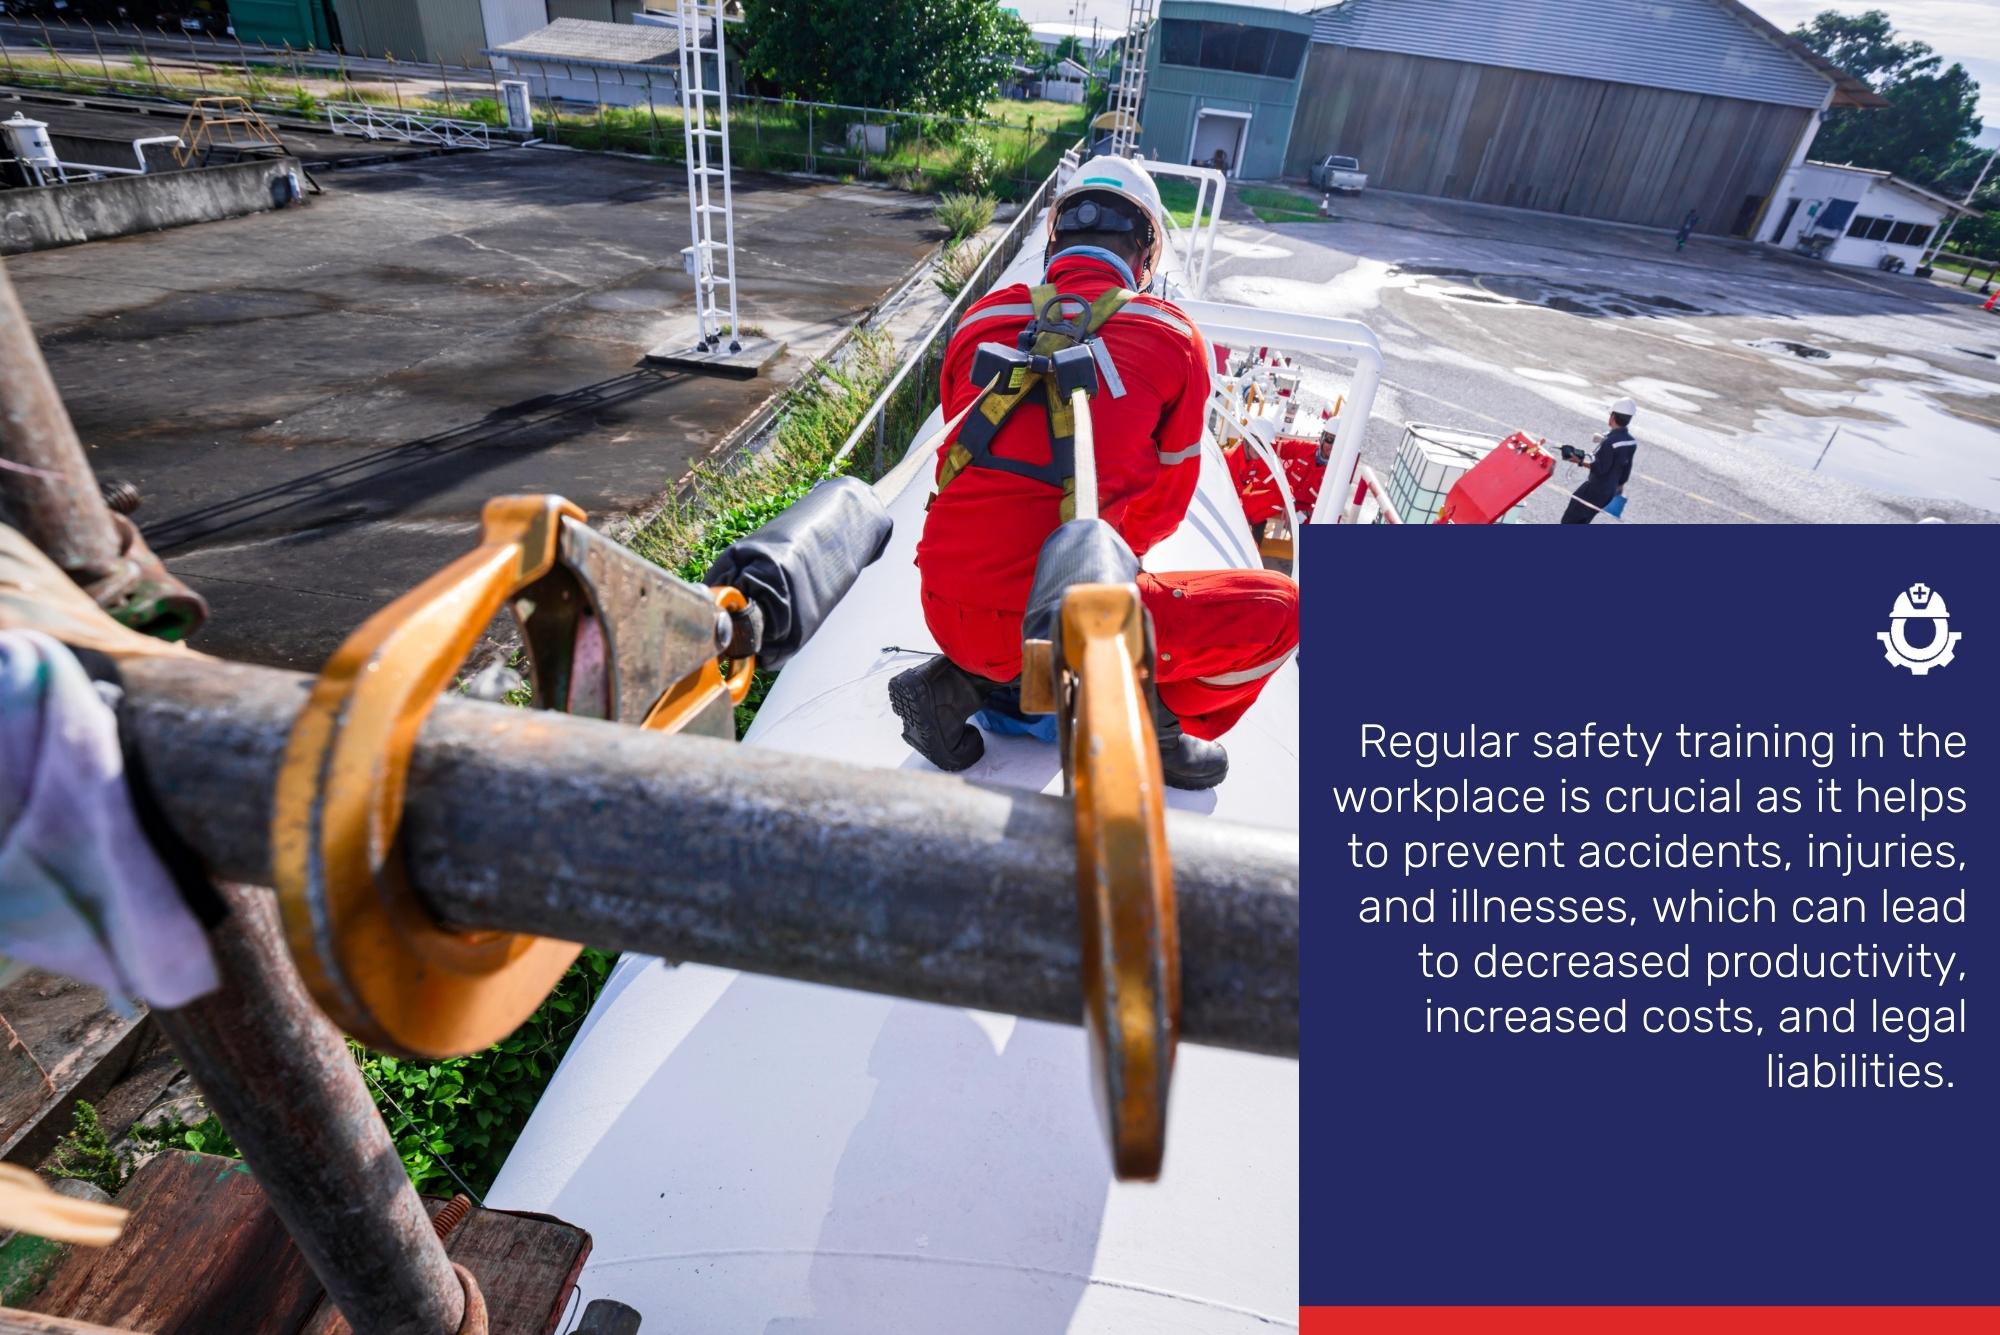 The benefits of regular safety training in the workplace